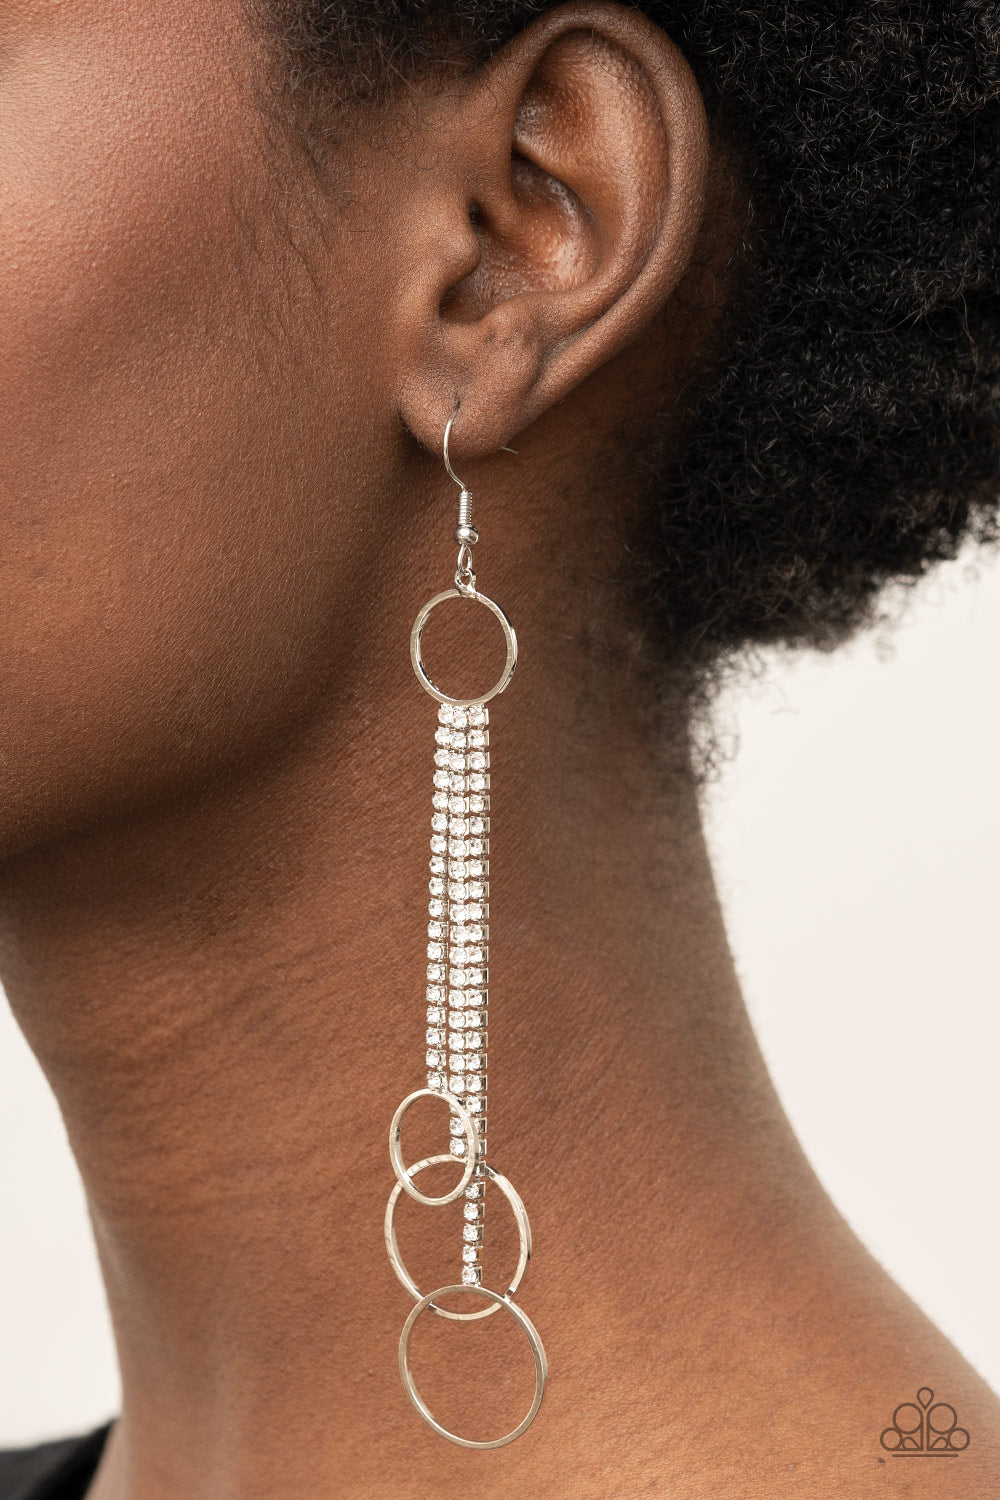 Demurely Dazzling White Earring - Paparazzi Accessories  Dainty silver hoops swing from the bottom of glittery strands of glassy white rhinestones that attach to the bottom of a dainty silver ring, creating a tantalizing tassel. Earring attaches to a standard fishhook fitting.  All Paparazzi Accessories are lead free and nickel free!  Sold as one pair of earrings.